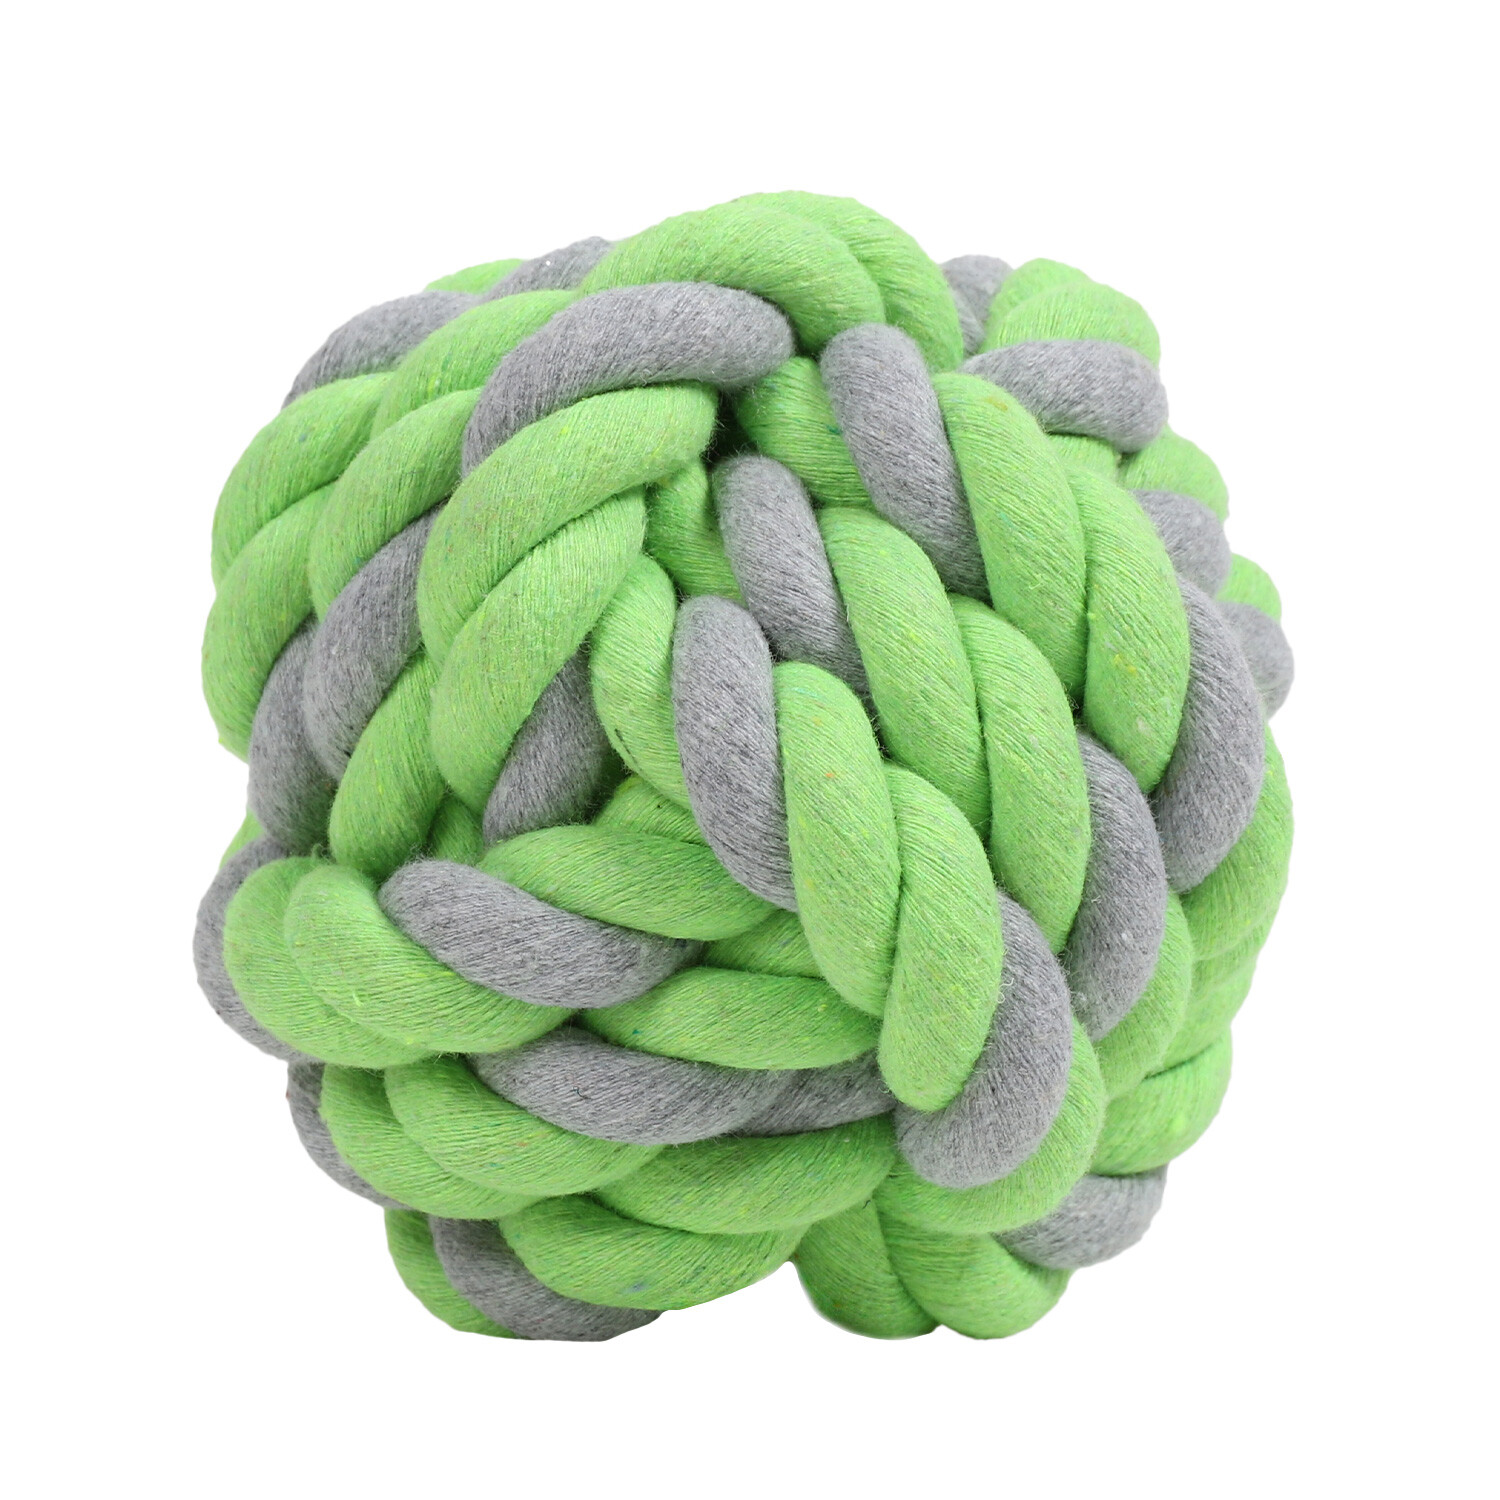 Clever Paws Large Rope Knot Ball Dog Toy Image 1